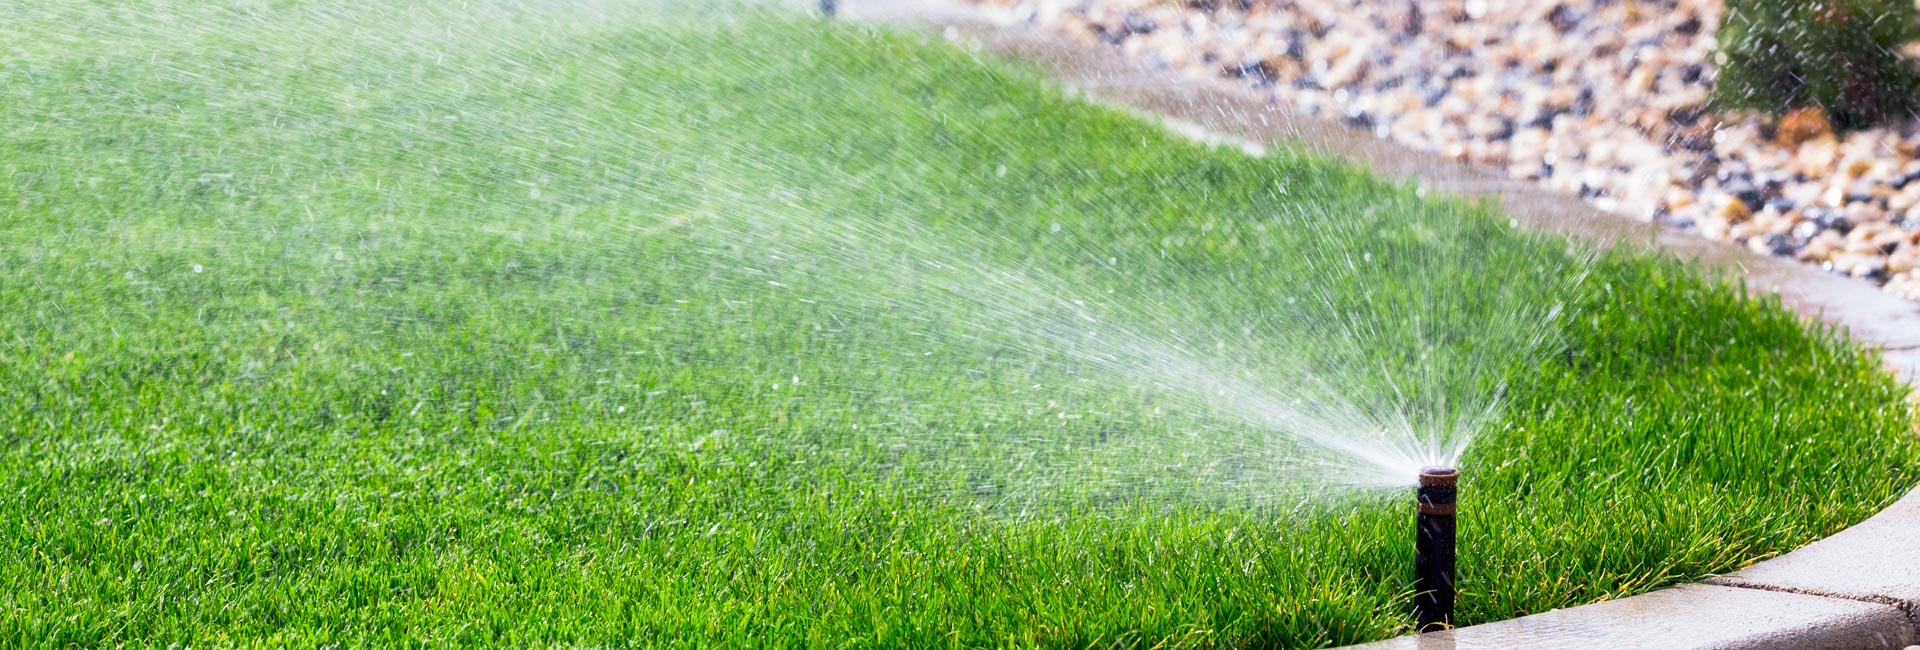 Automatic Sprinklers Watering Grass